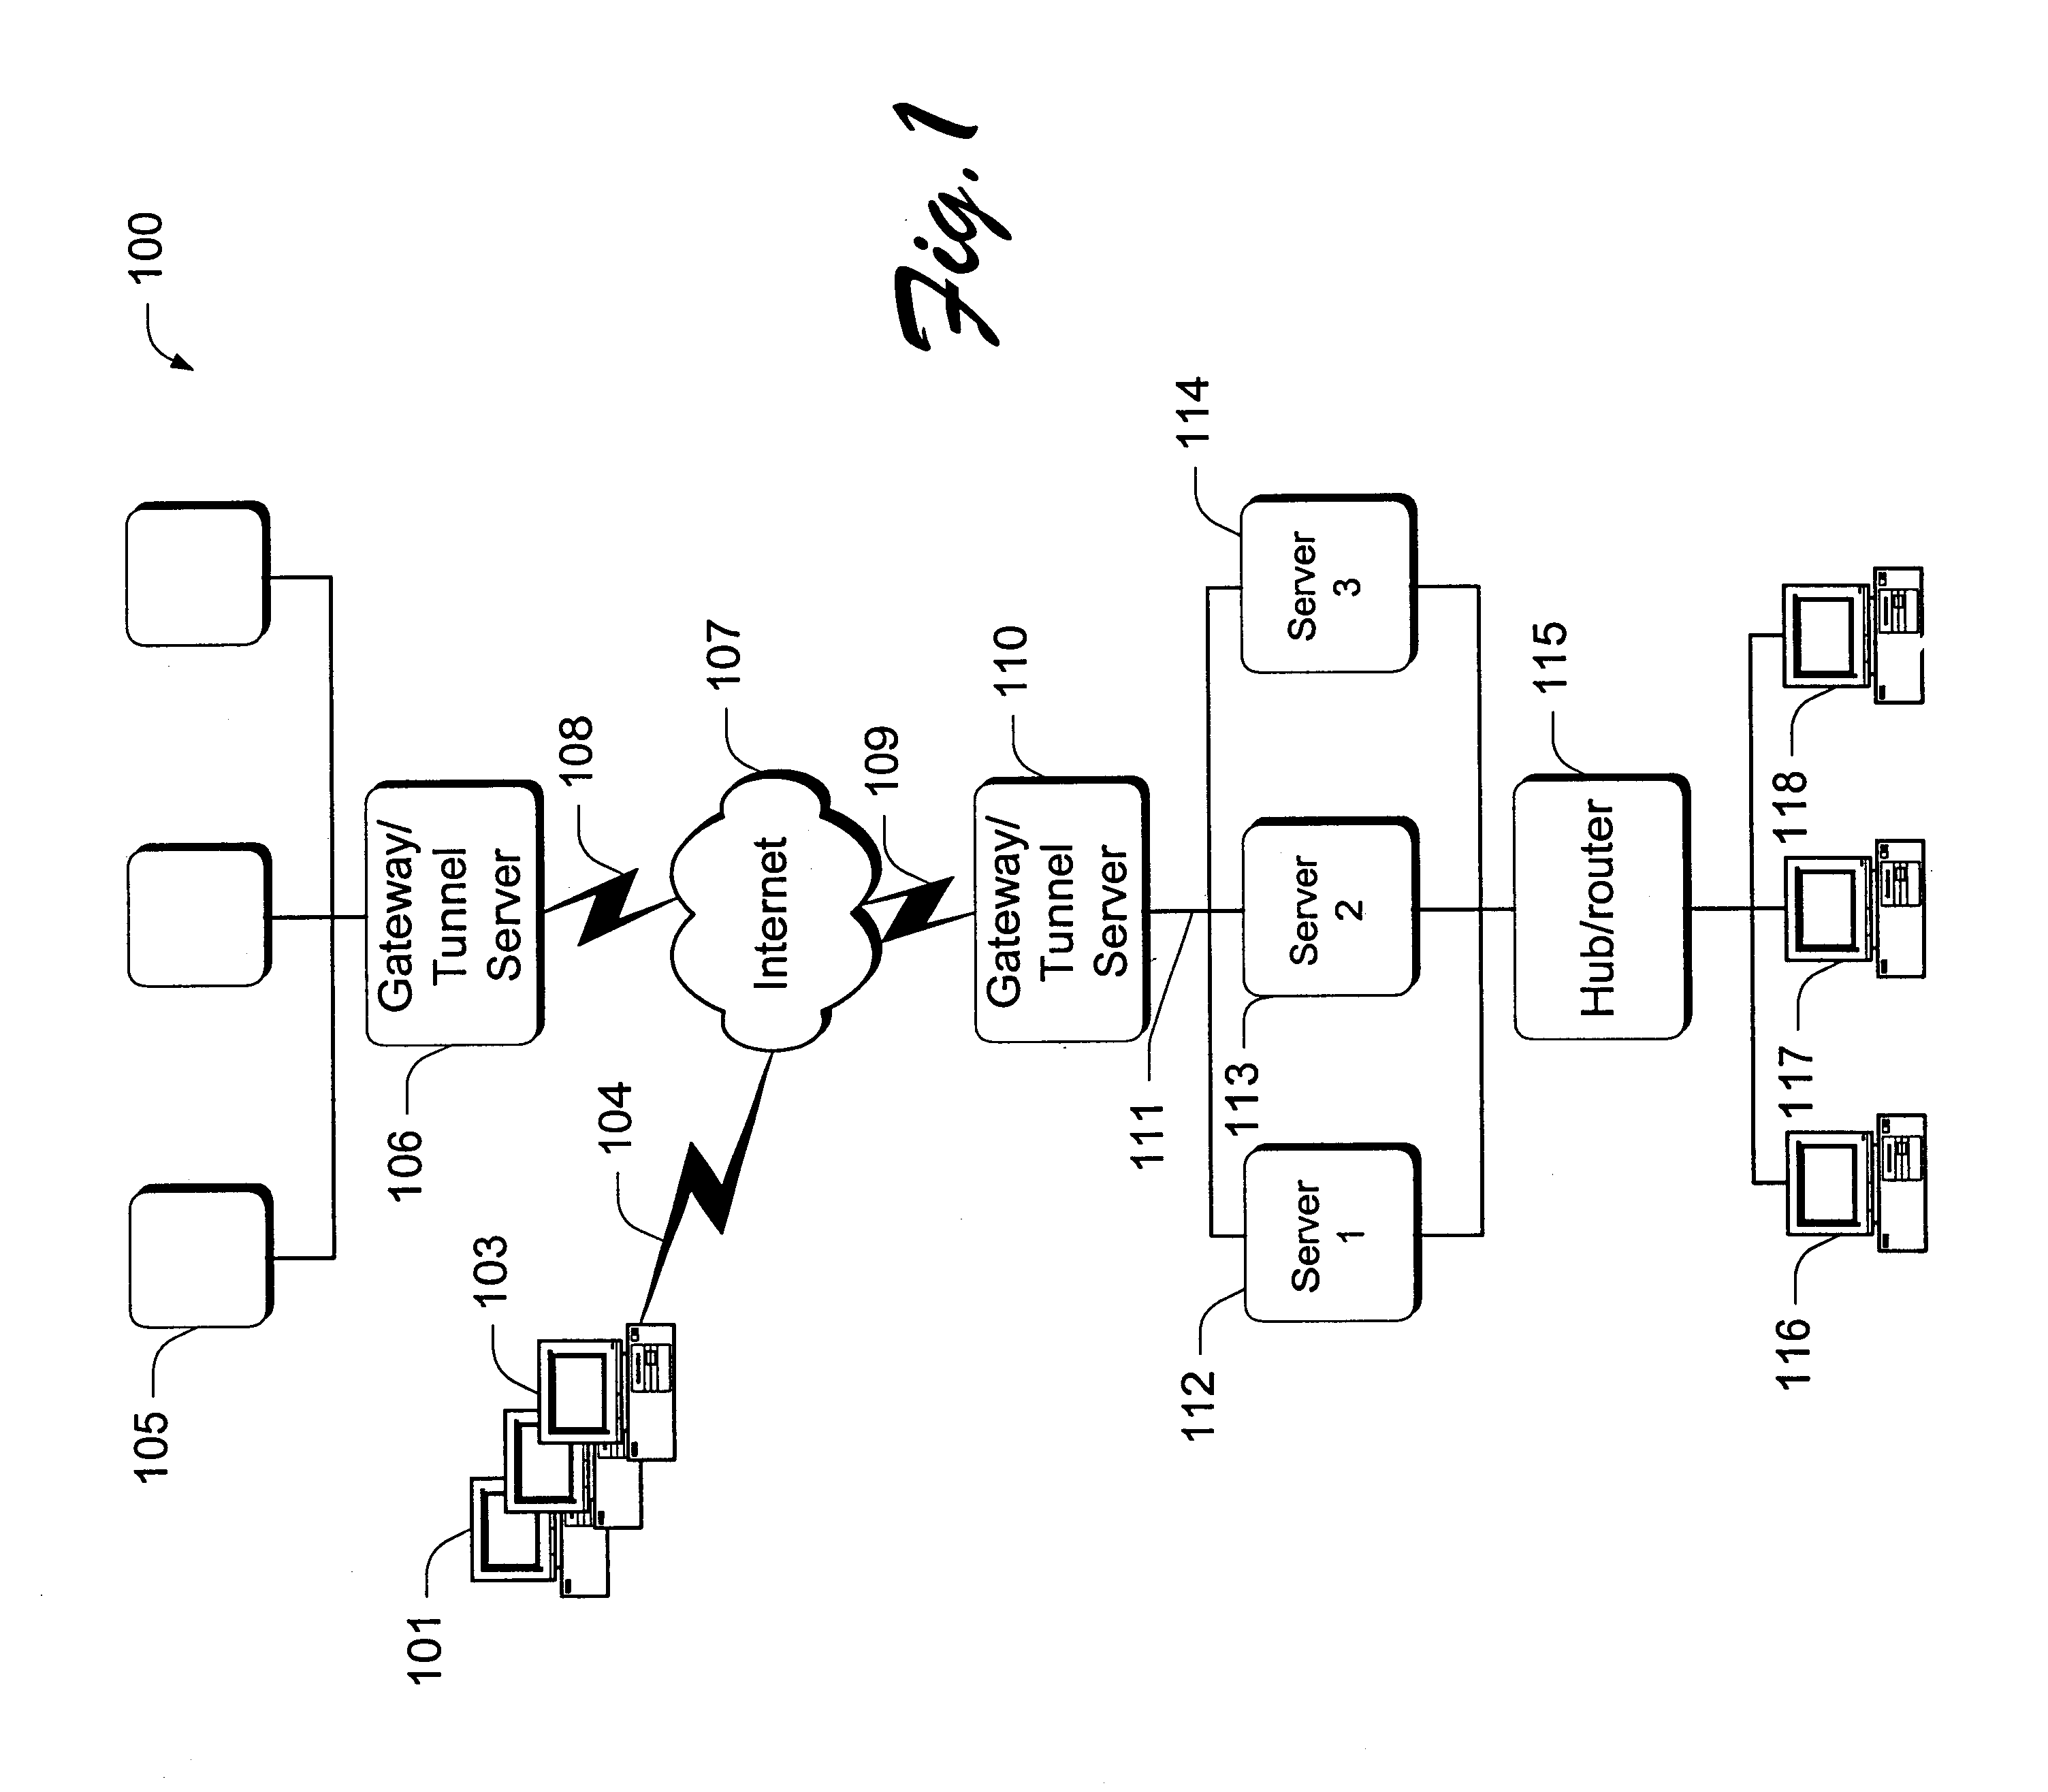 Methods and systems for alleviating network congestion